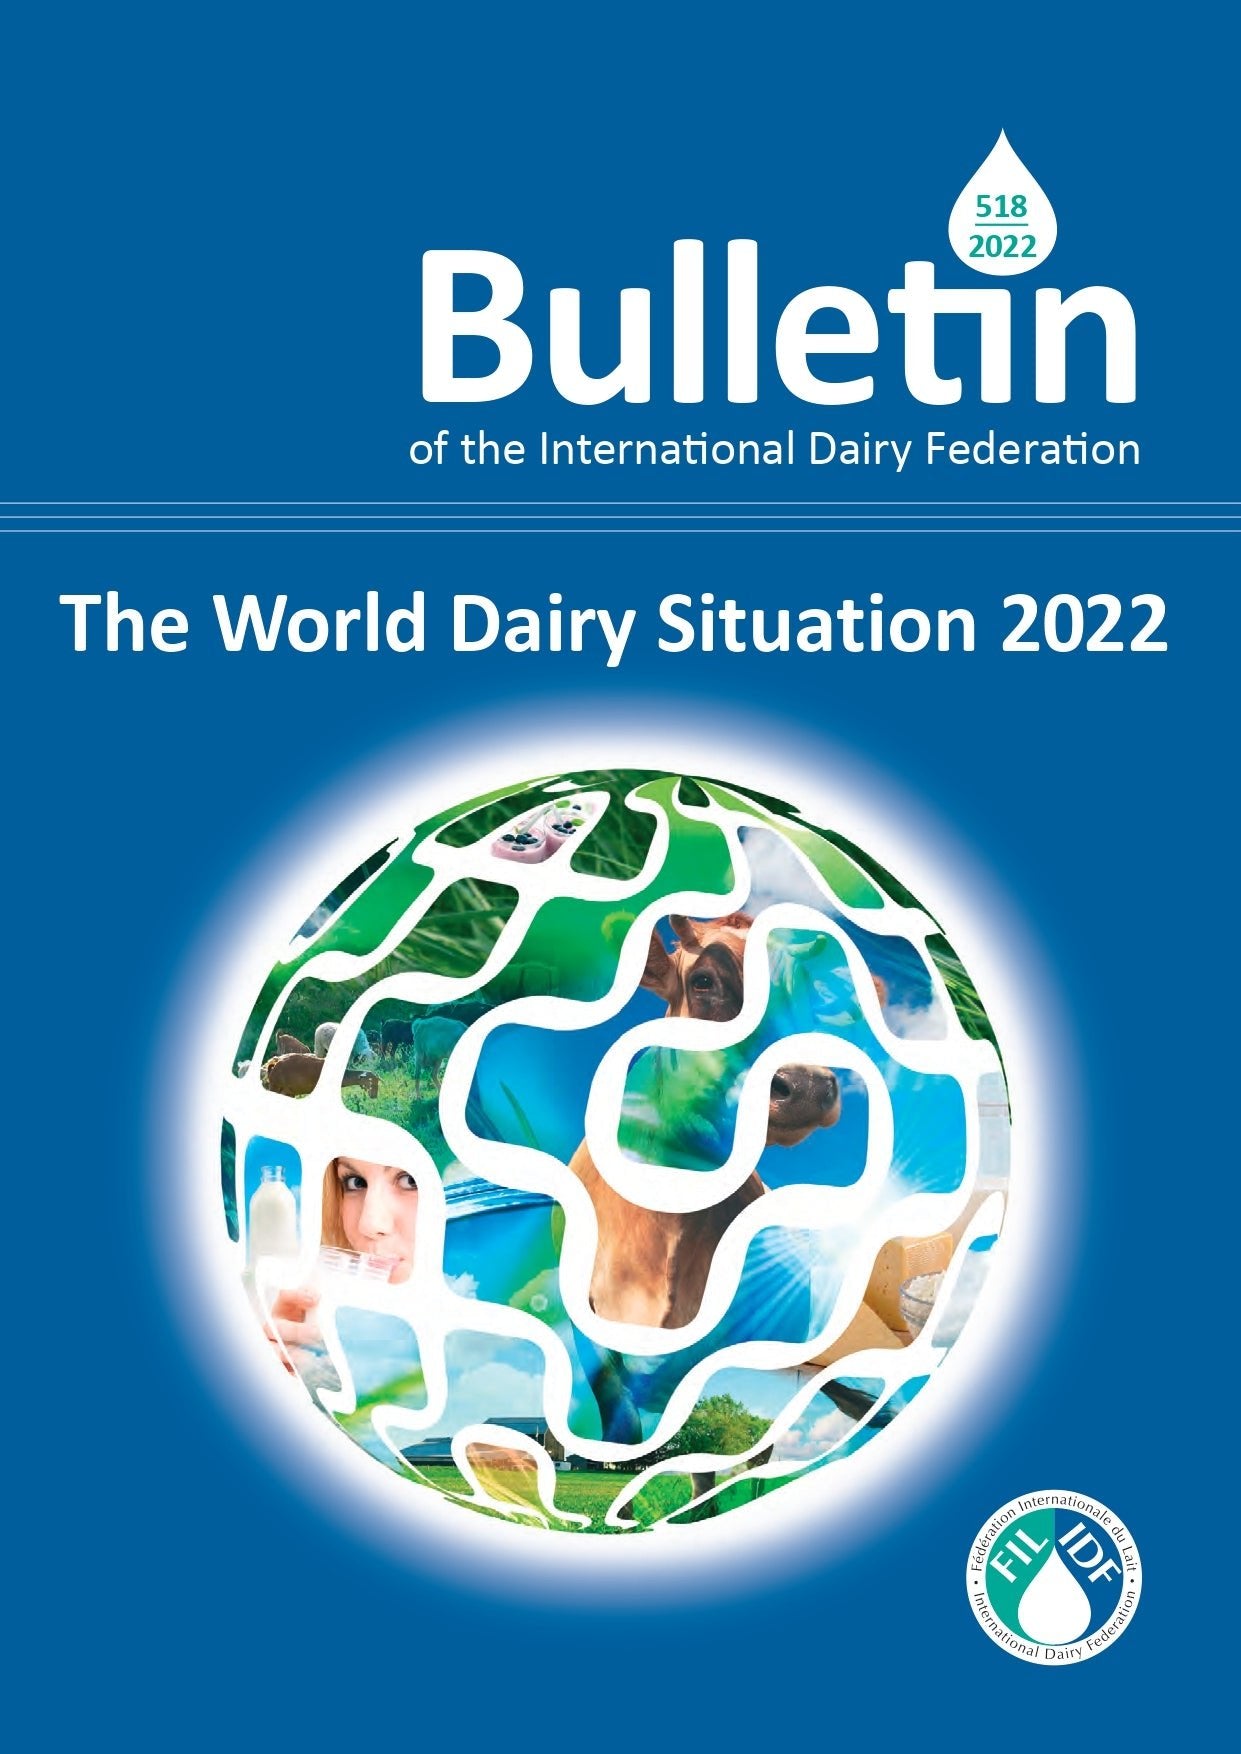 Bulletin of the IDF N°518/2022: The World Dairy Situation Report 2022 - FIL-IDF